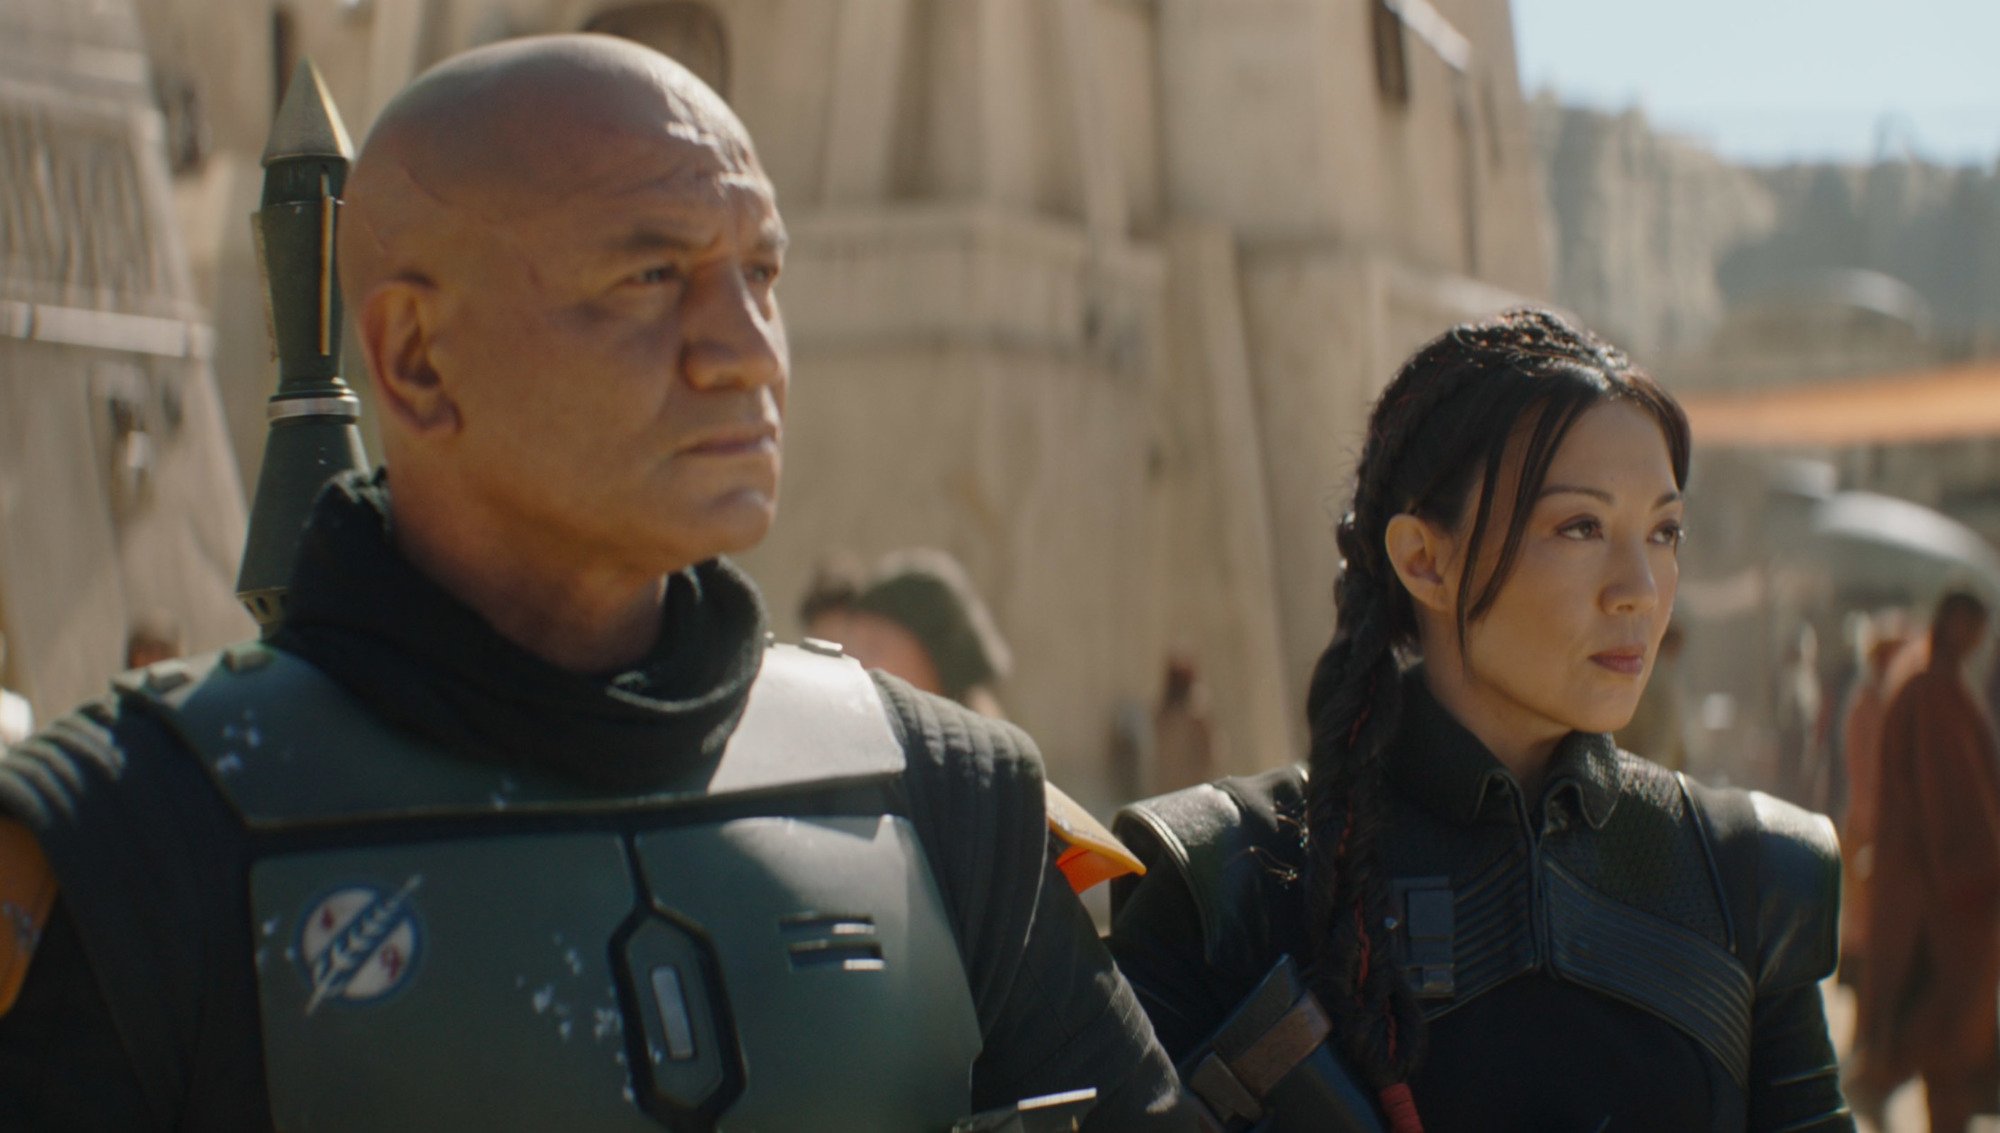 Temuera Morrison and Ming-Na Wen in 'The Book of Boba Fett' Episode 1.